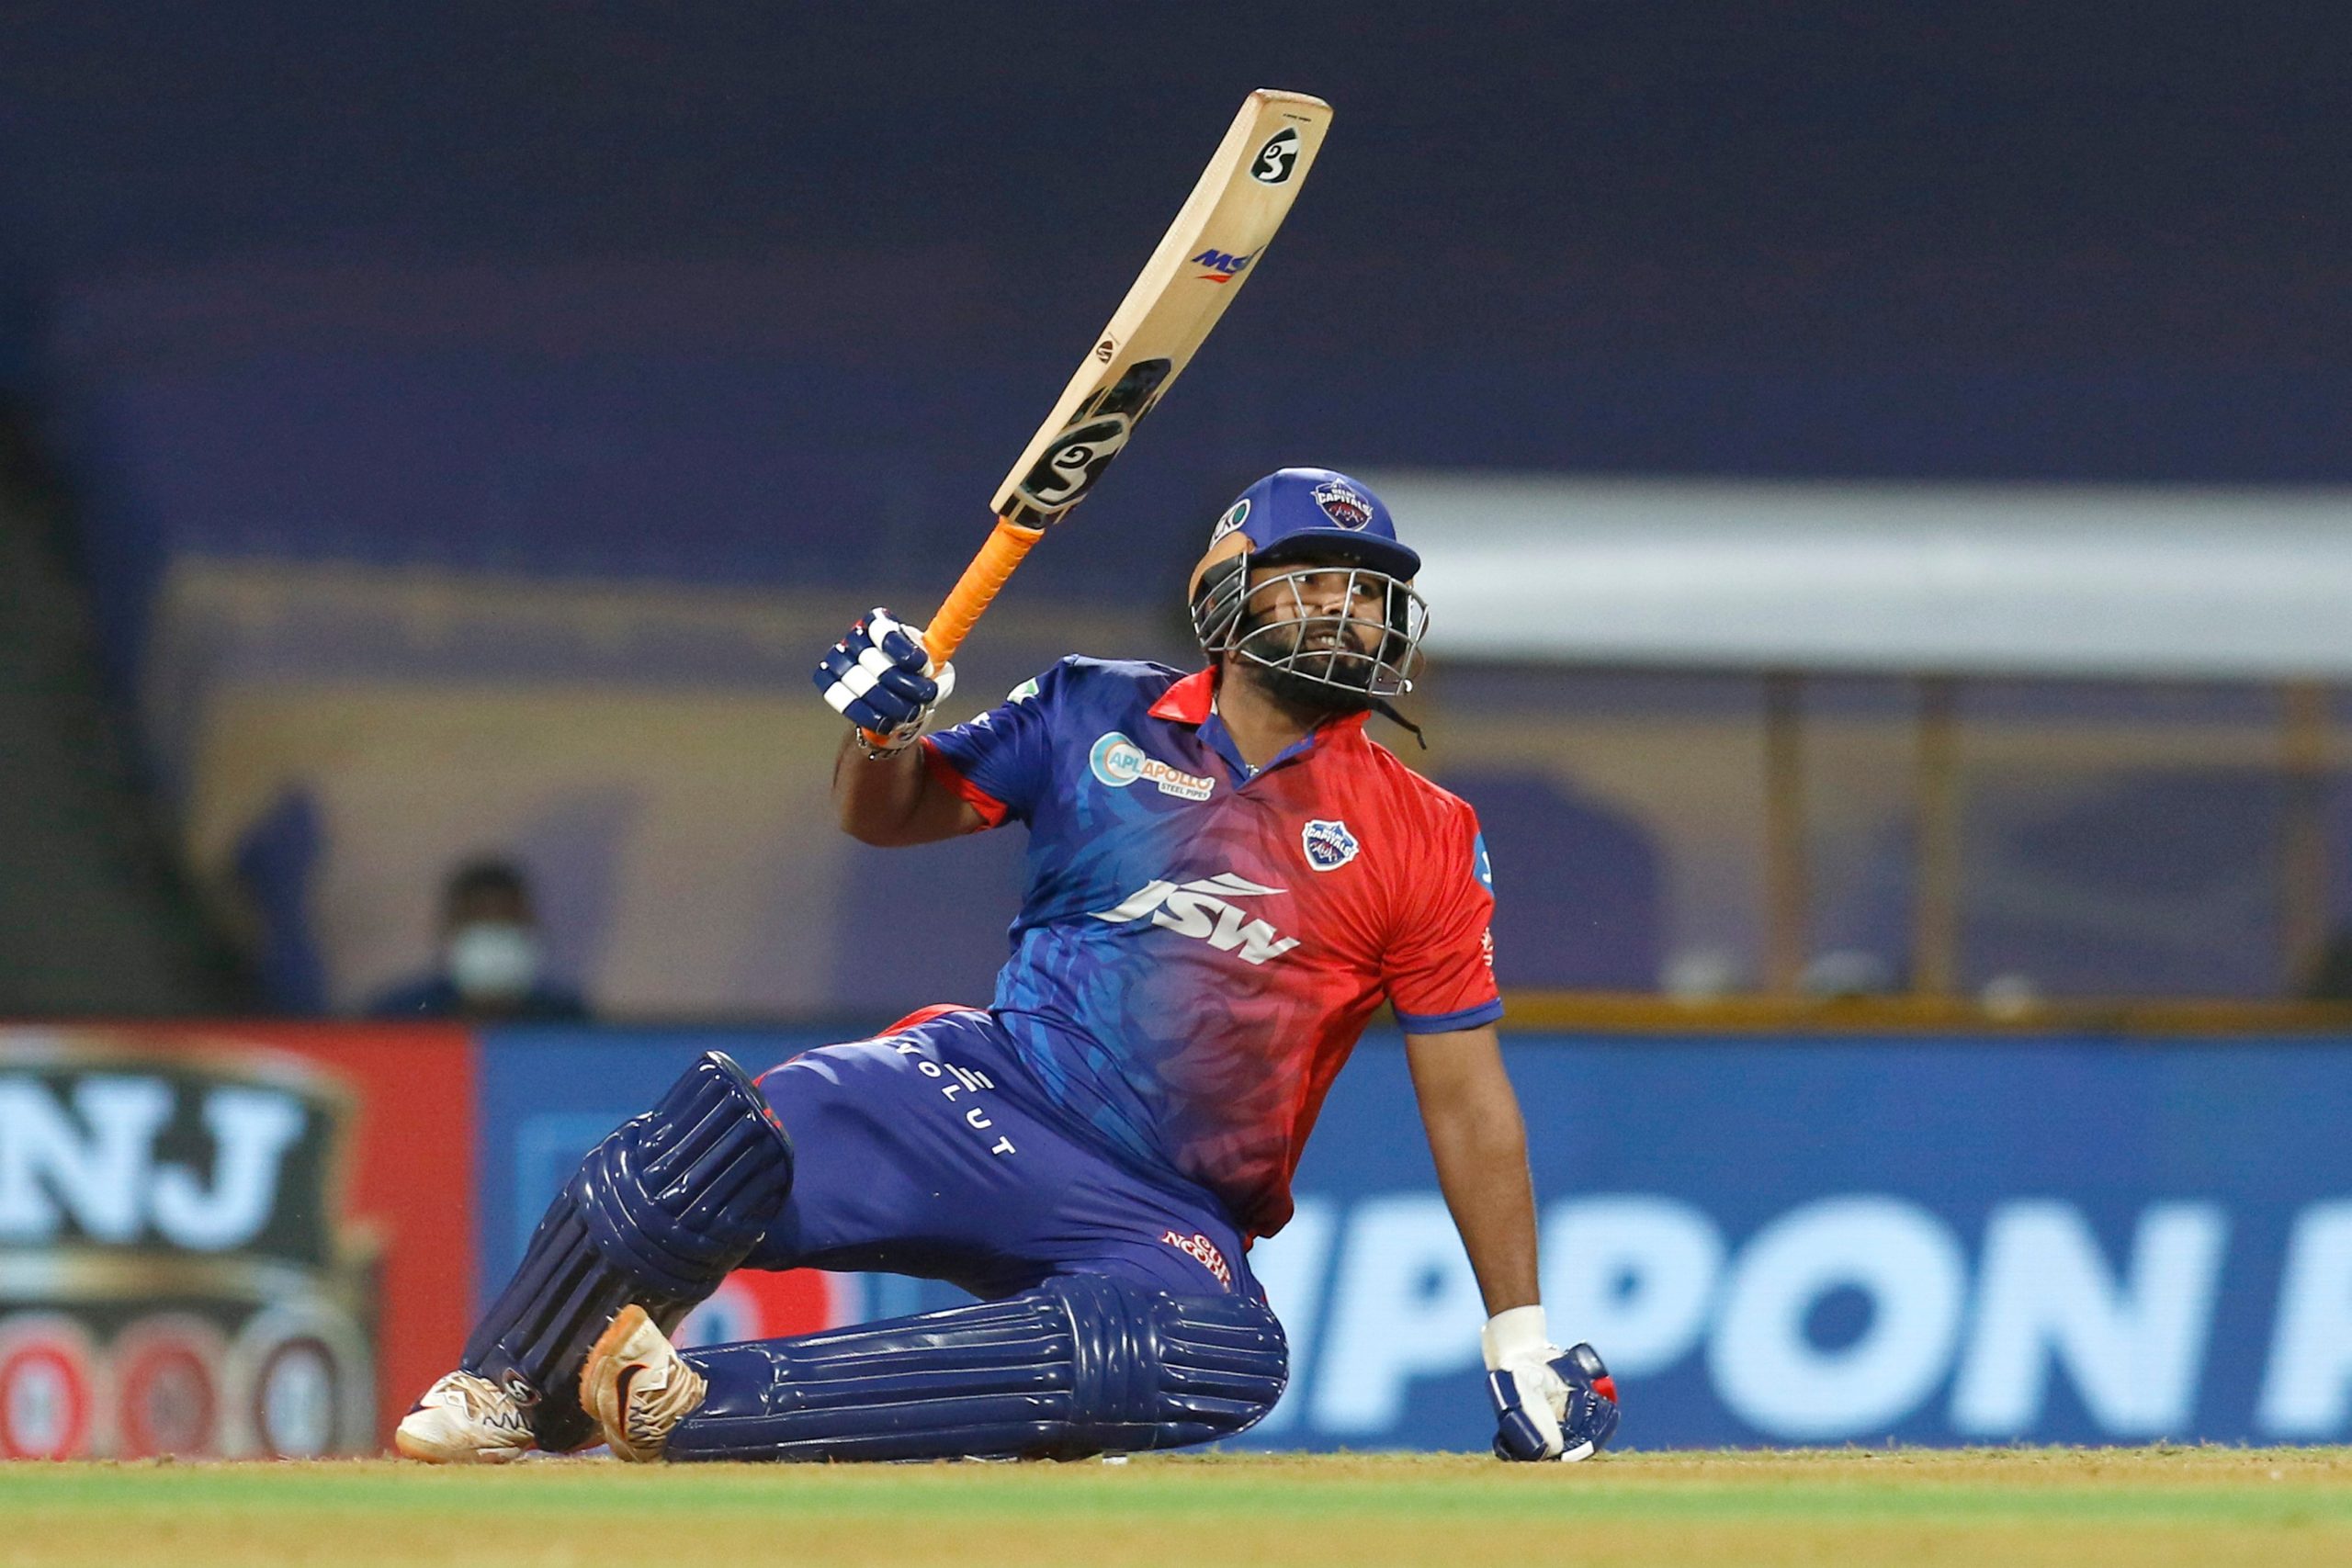 DC skipper Rishabh Pant wants team to stay positive amid COVID scare